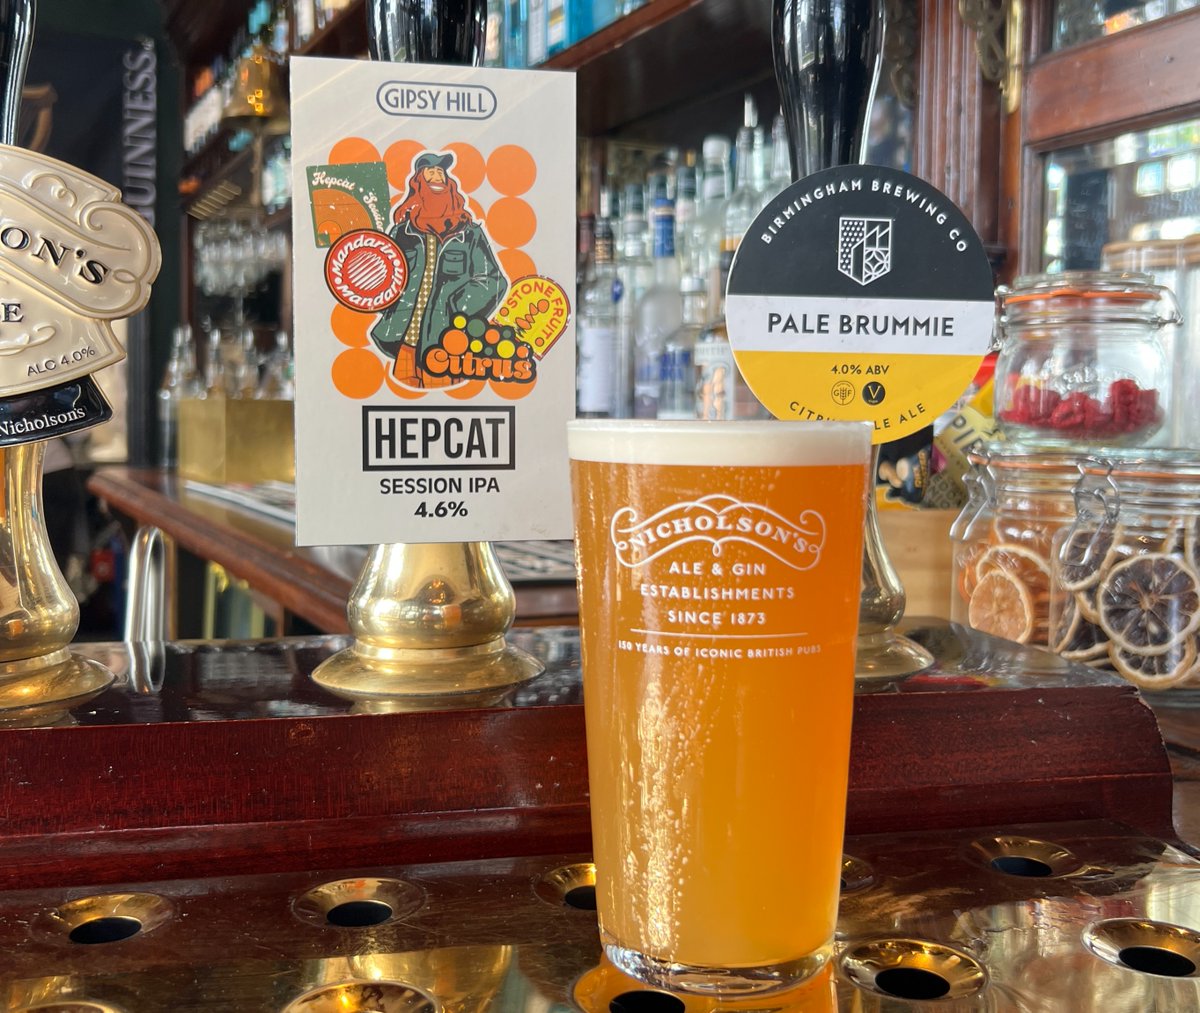 Have you tried a pint of @GipsyHillBrew Hepcat cask yet? Available in our pubs during @caskaleweek 🍺 #caskaleweek #nicholsonspubs